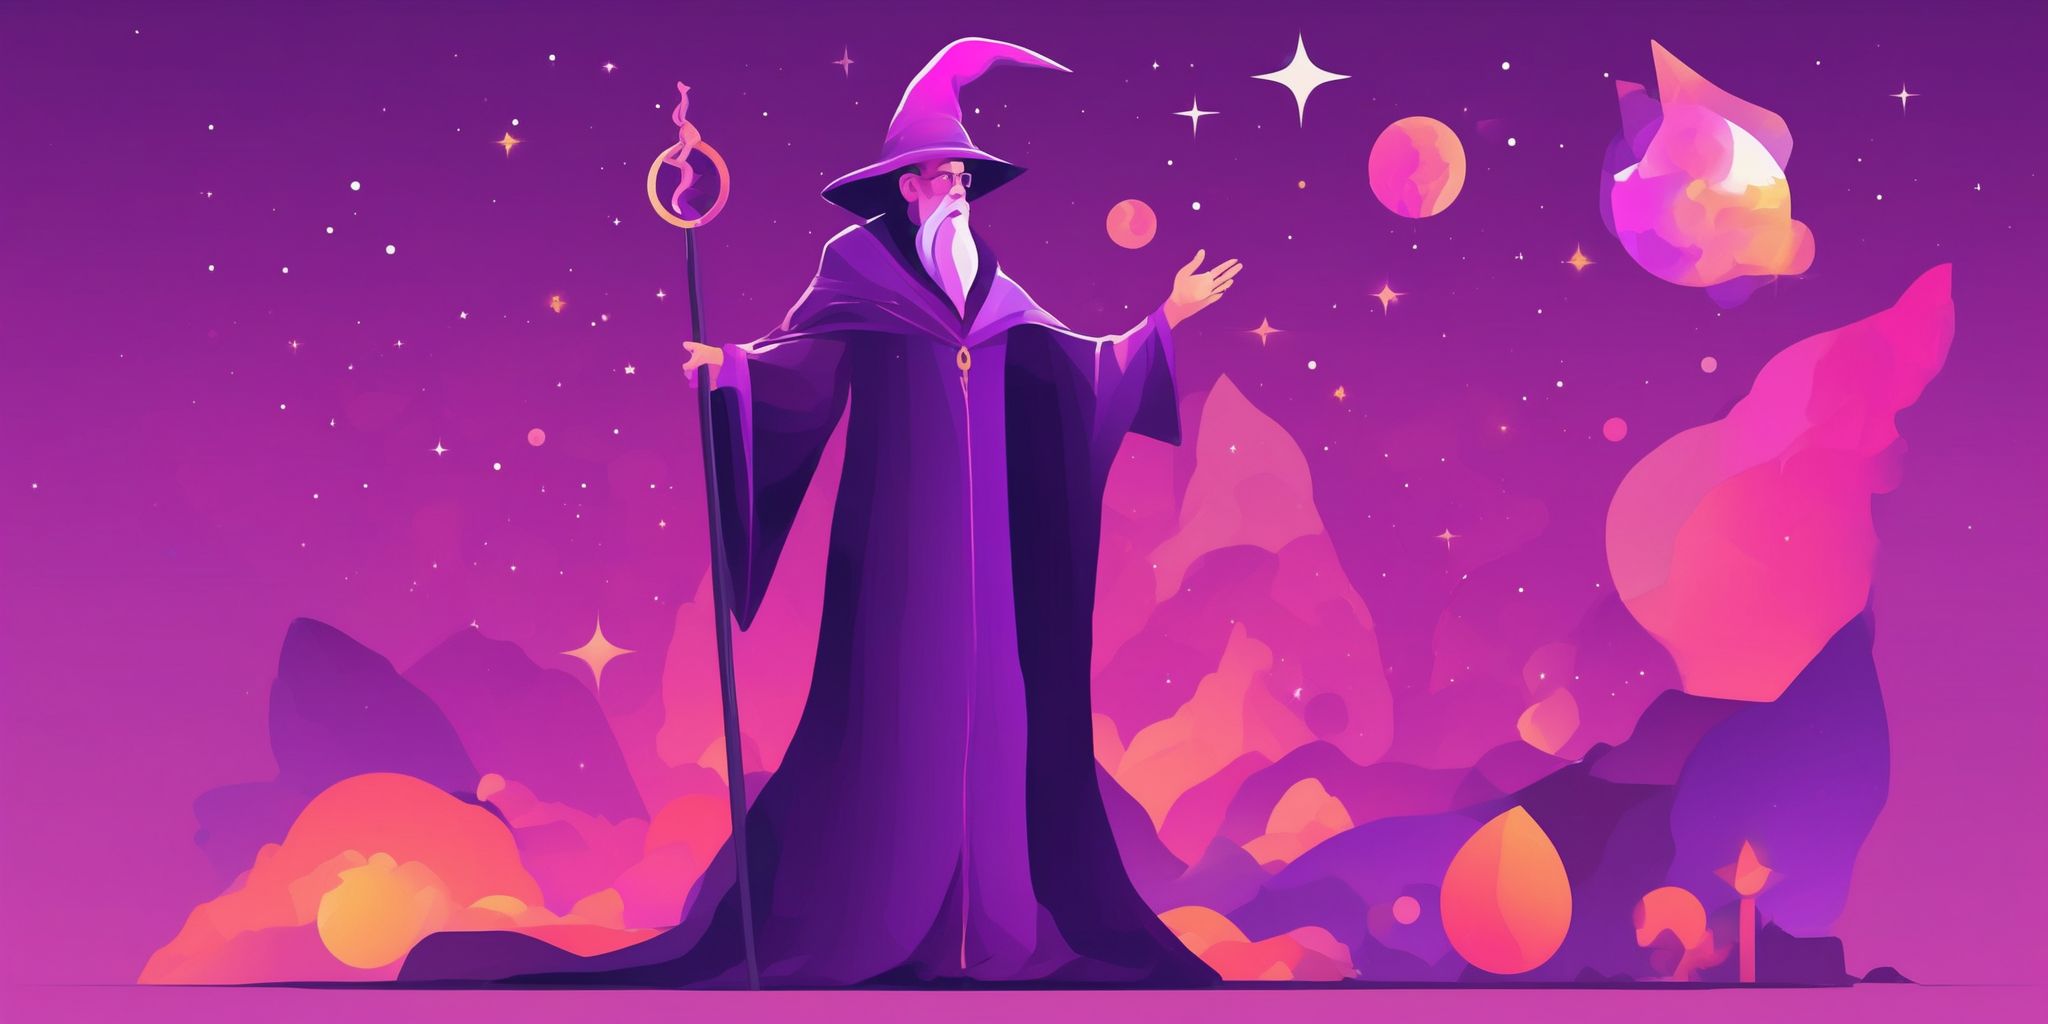 Image Metaphor: Wizard in flat illustration style, colorful purple gradient colors